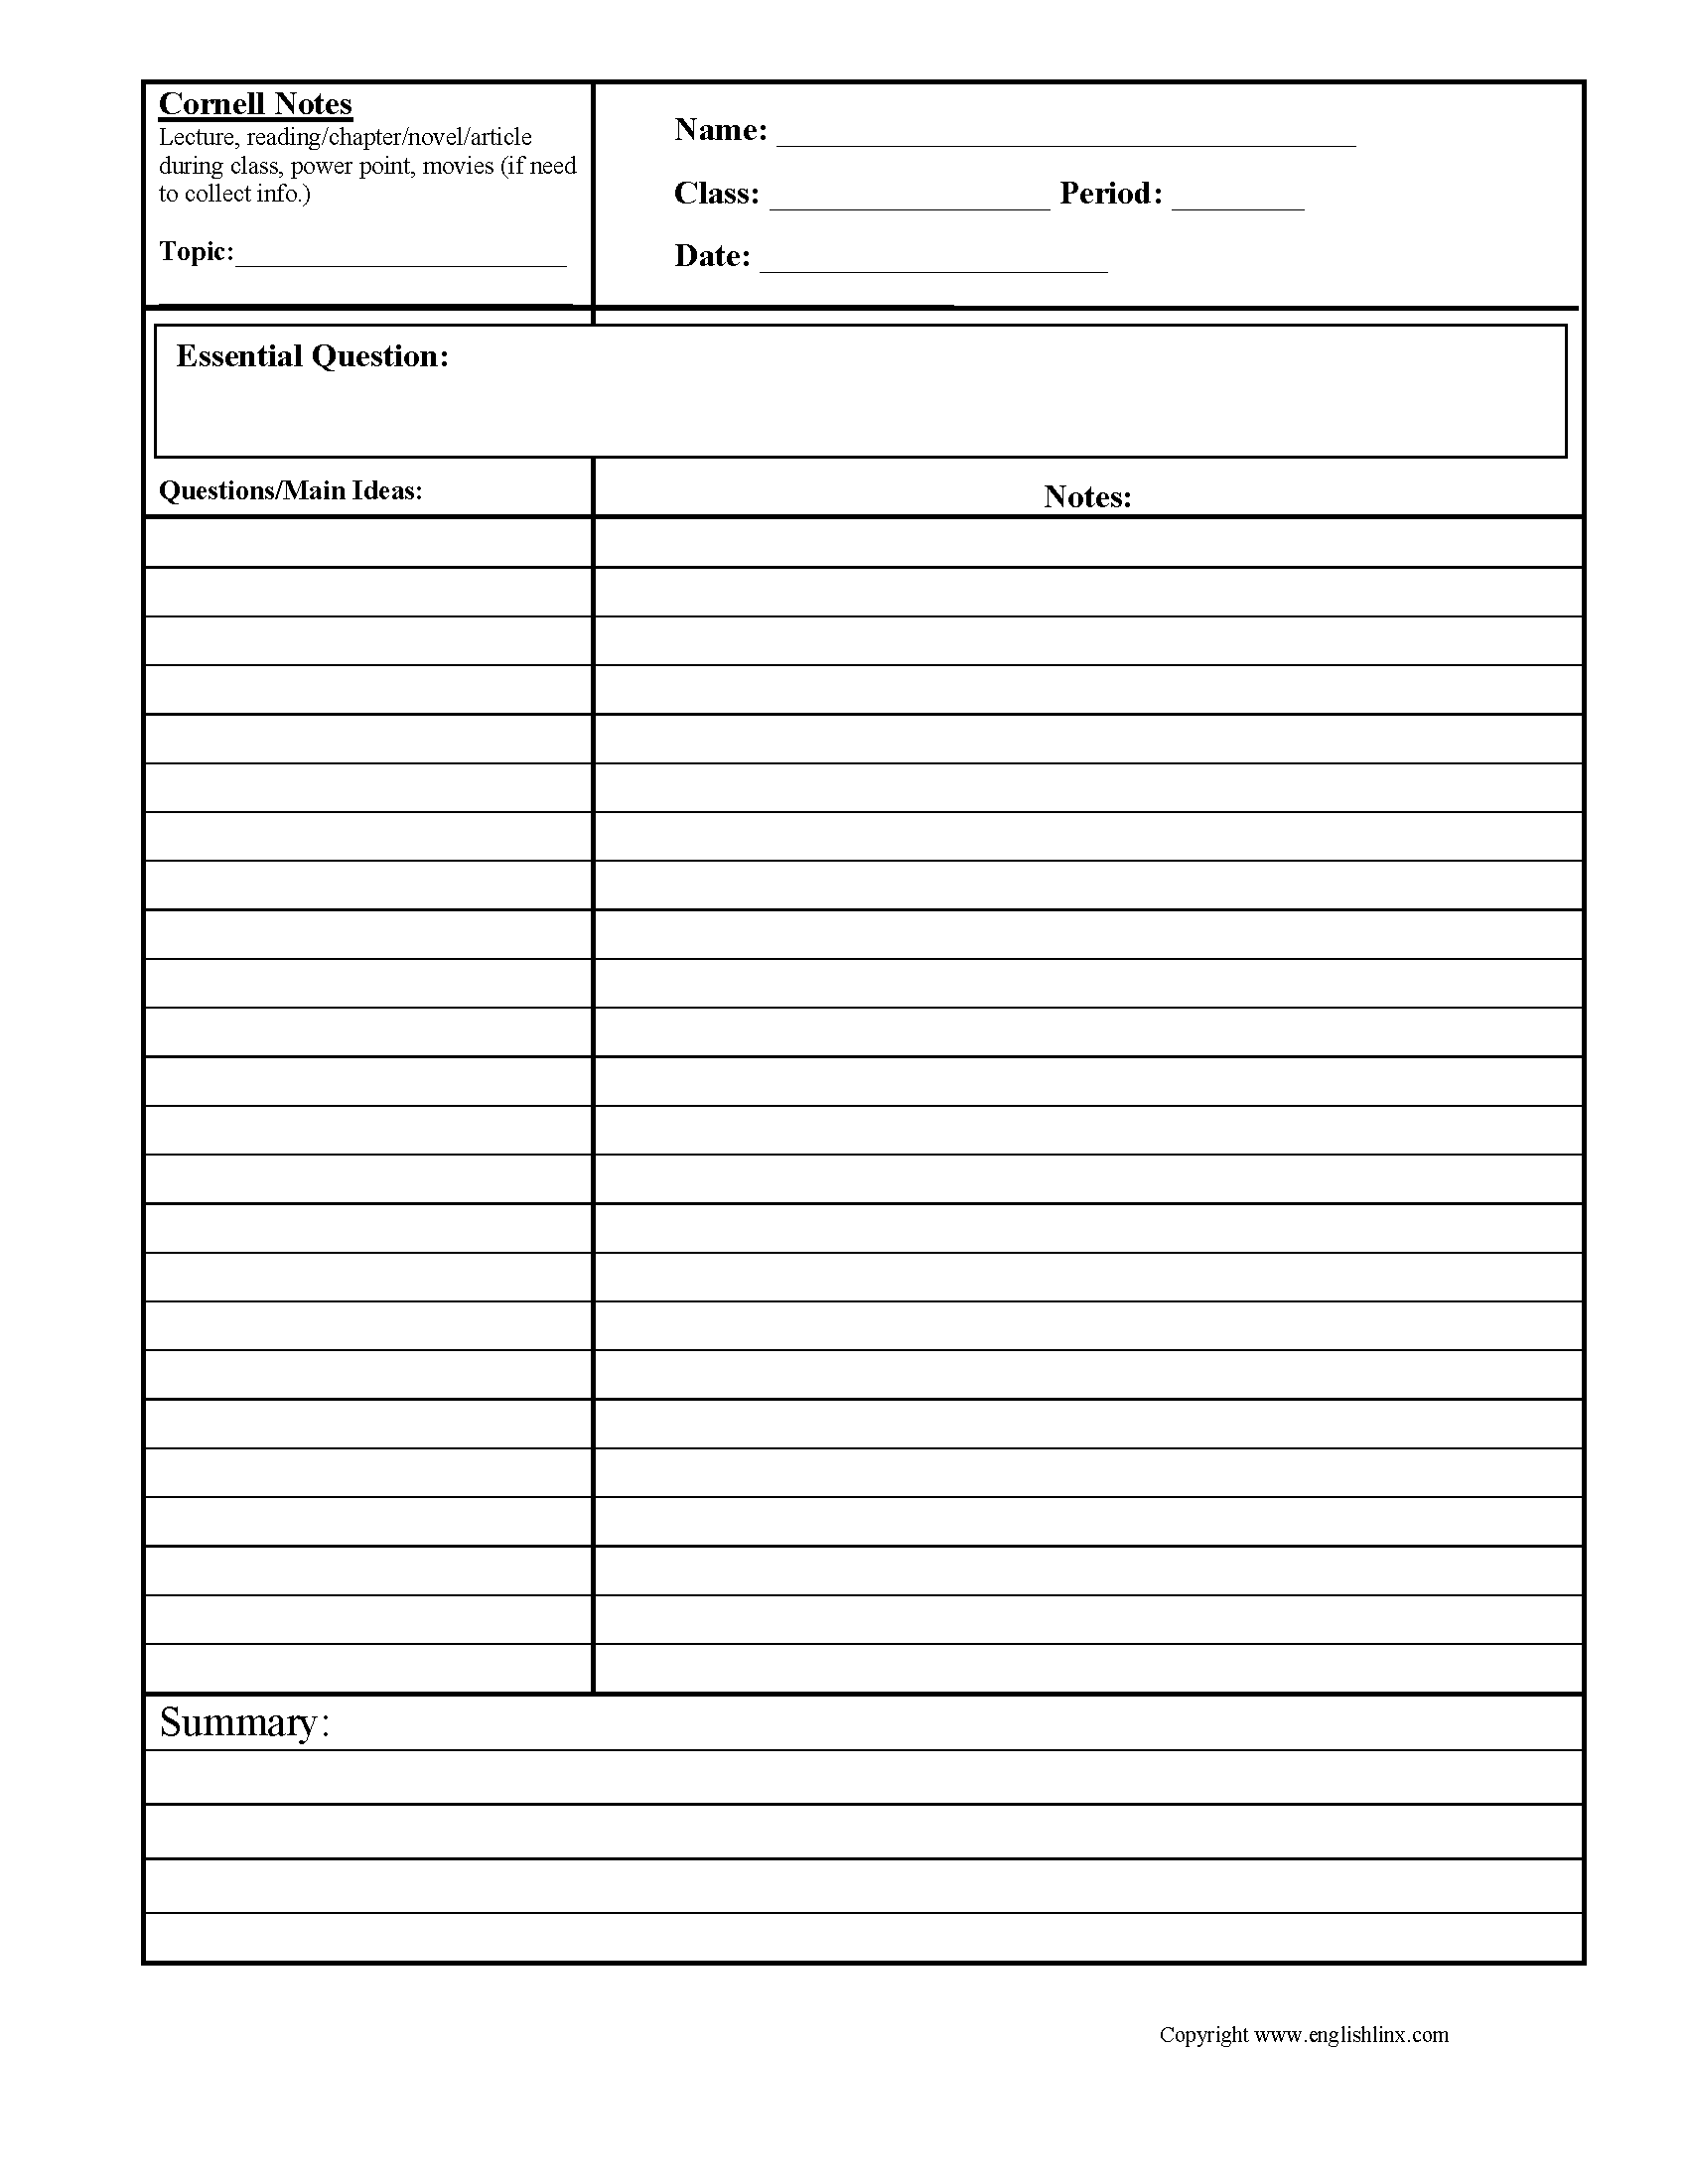 Cornell Notes Graphic Organizers Worksheets